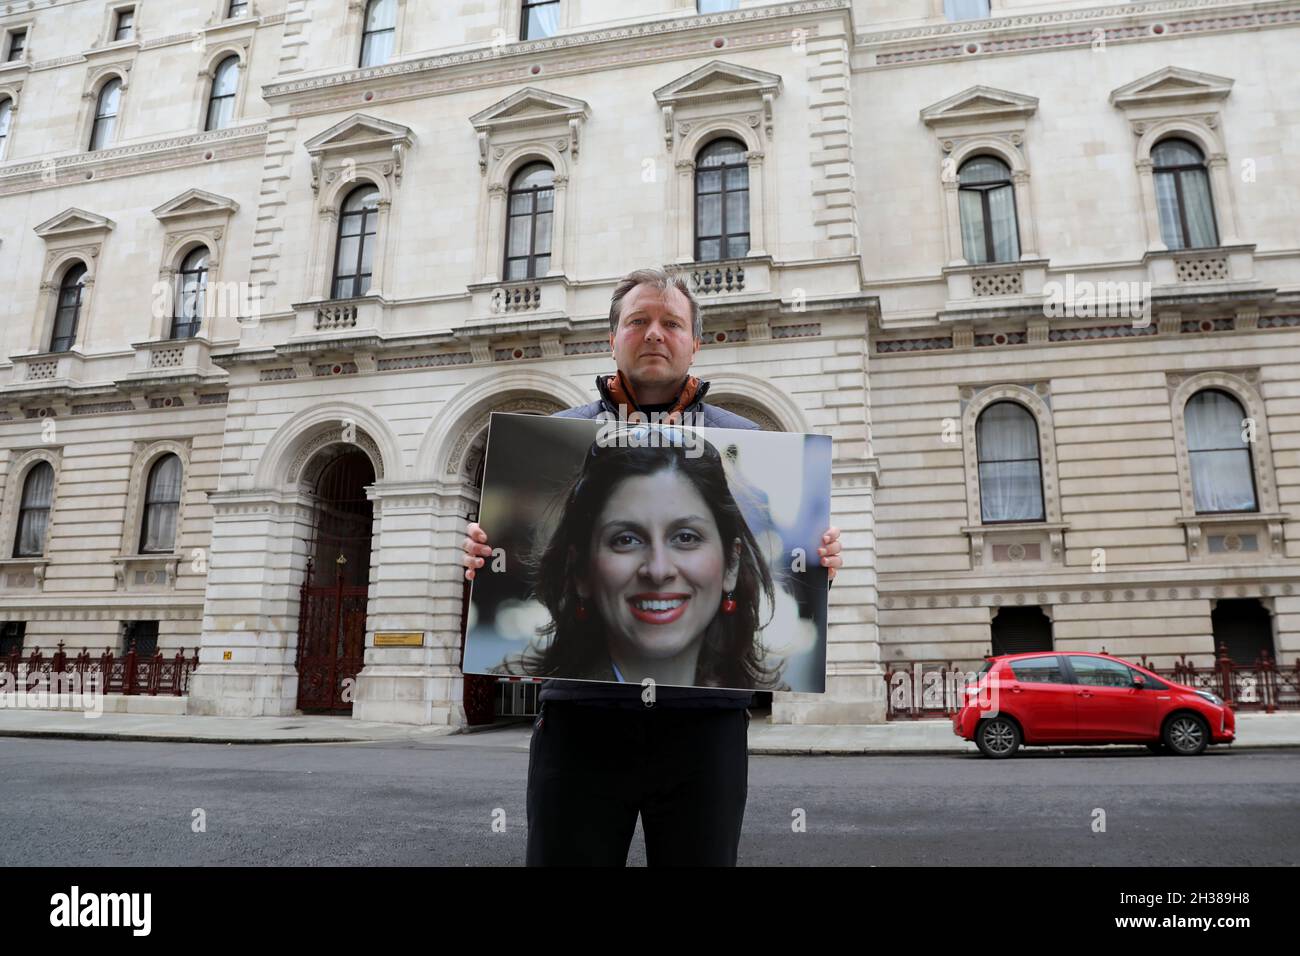 London, UK, 26 October 2021: Richard Ratcliffe holds up a photo of his wife Nazanin Zaghari-Ratcliffe outside the Foreign, Commonwealth and Developmen Stock Photo